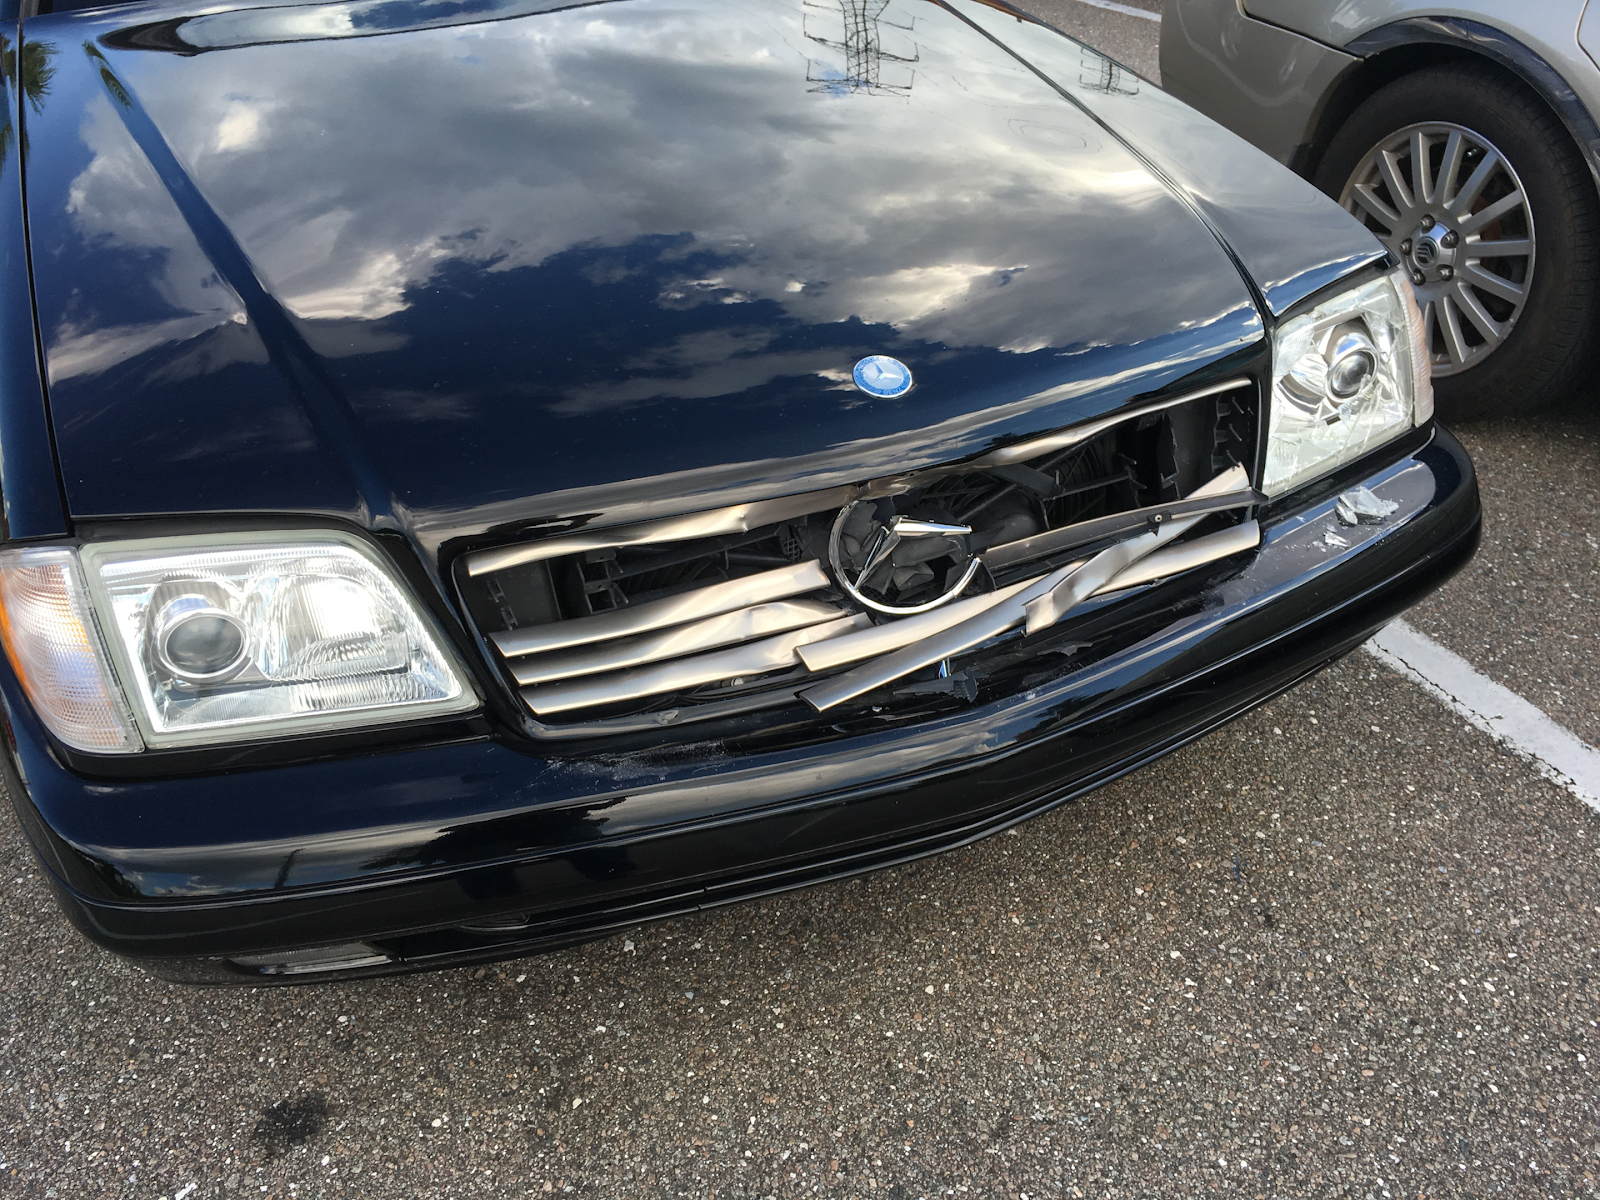 clearwater police department involved in a car accident front end accident